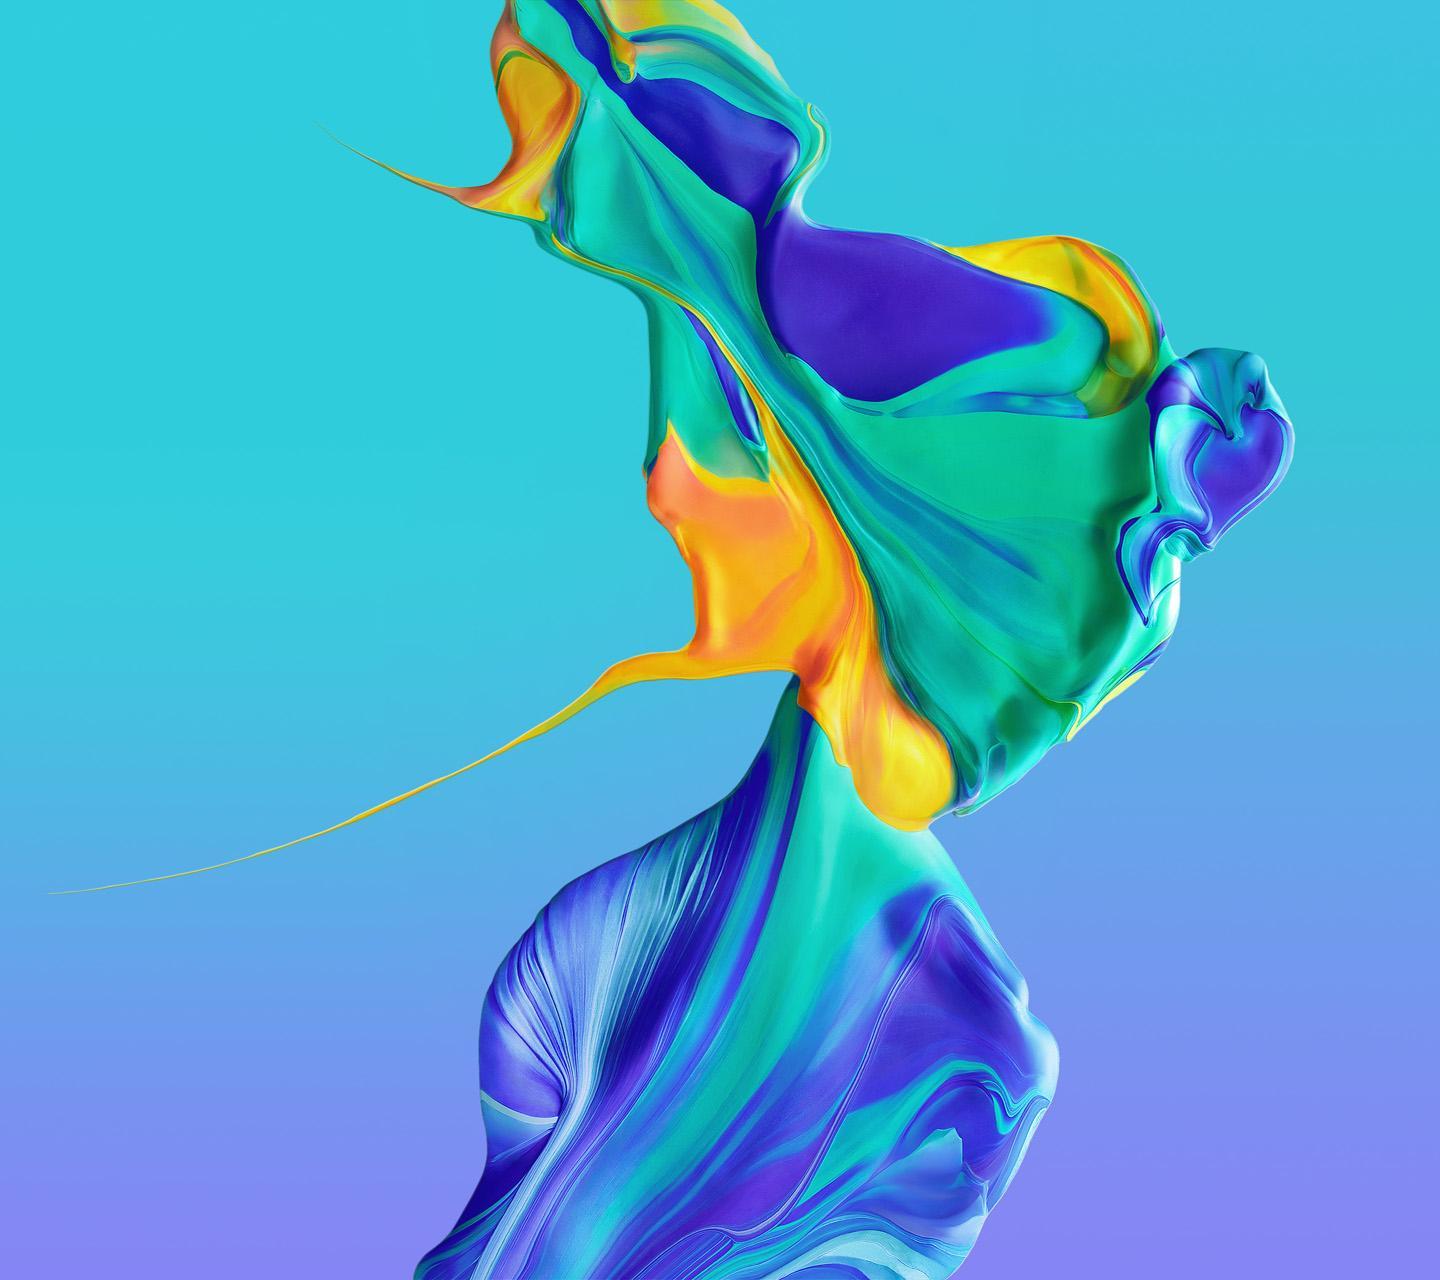 Wallpaper For Huawei P30 Pro Android Apk